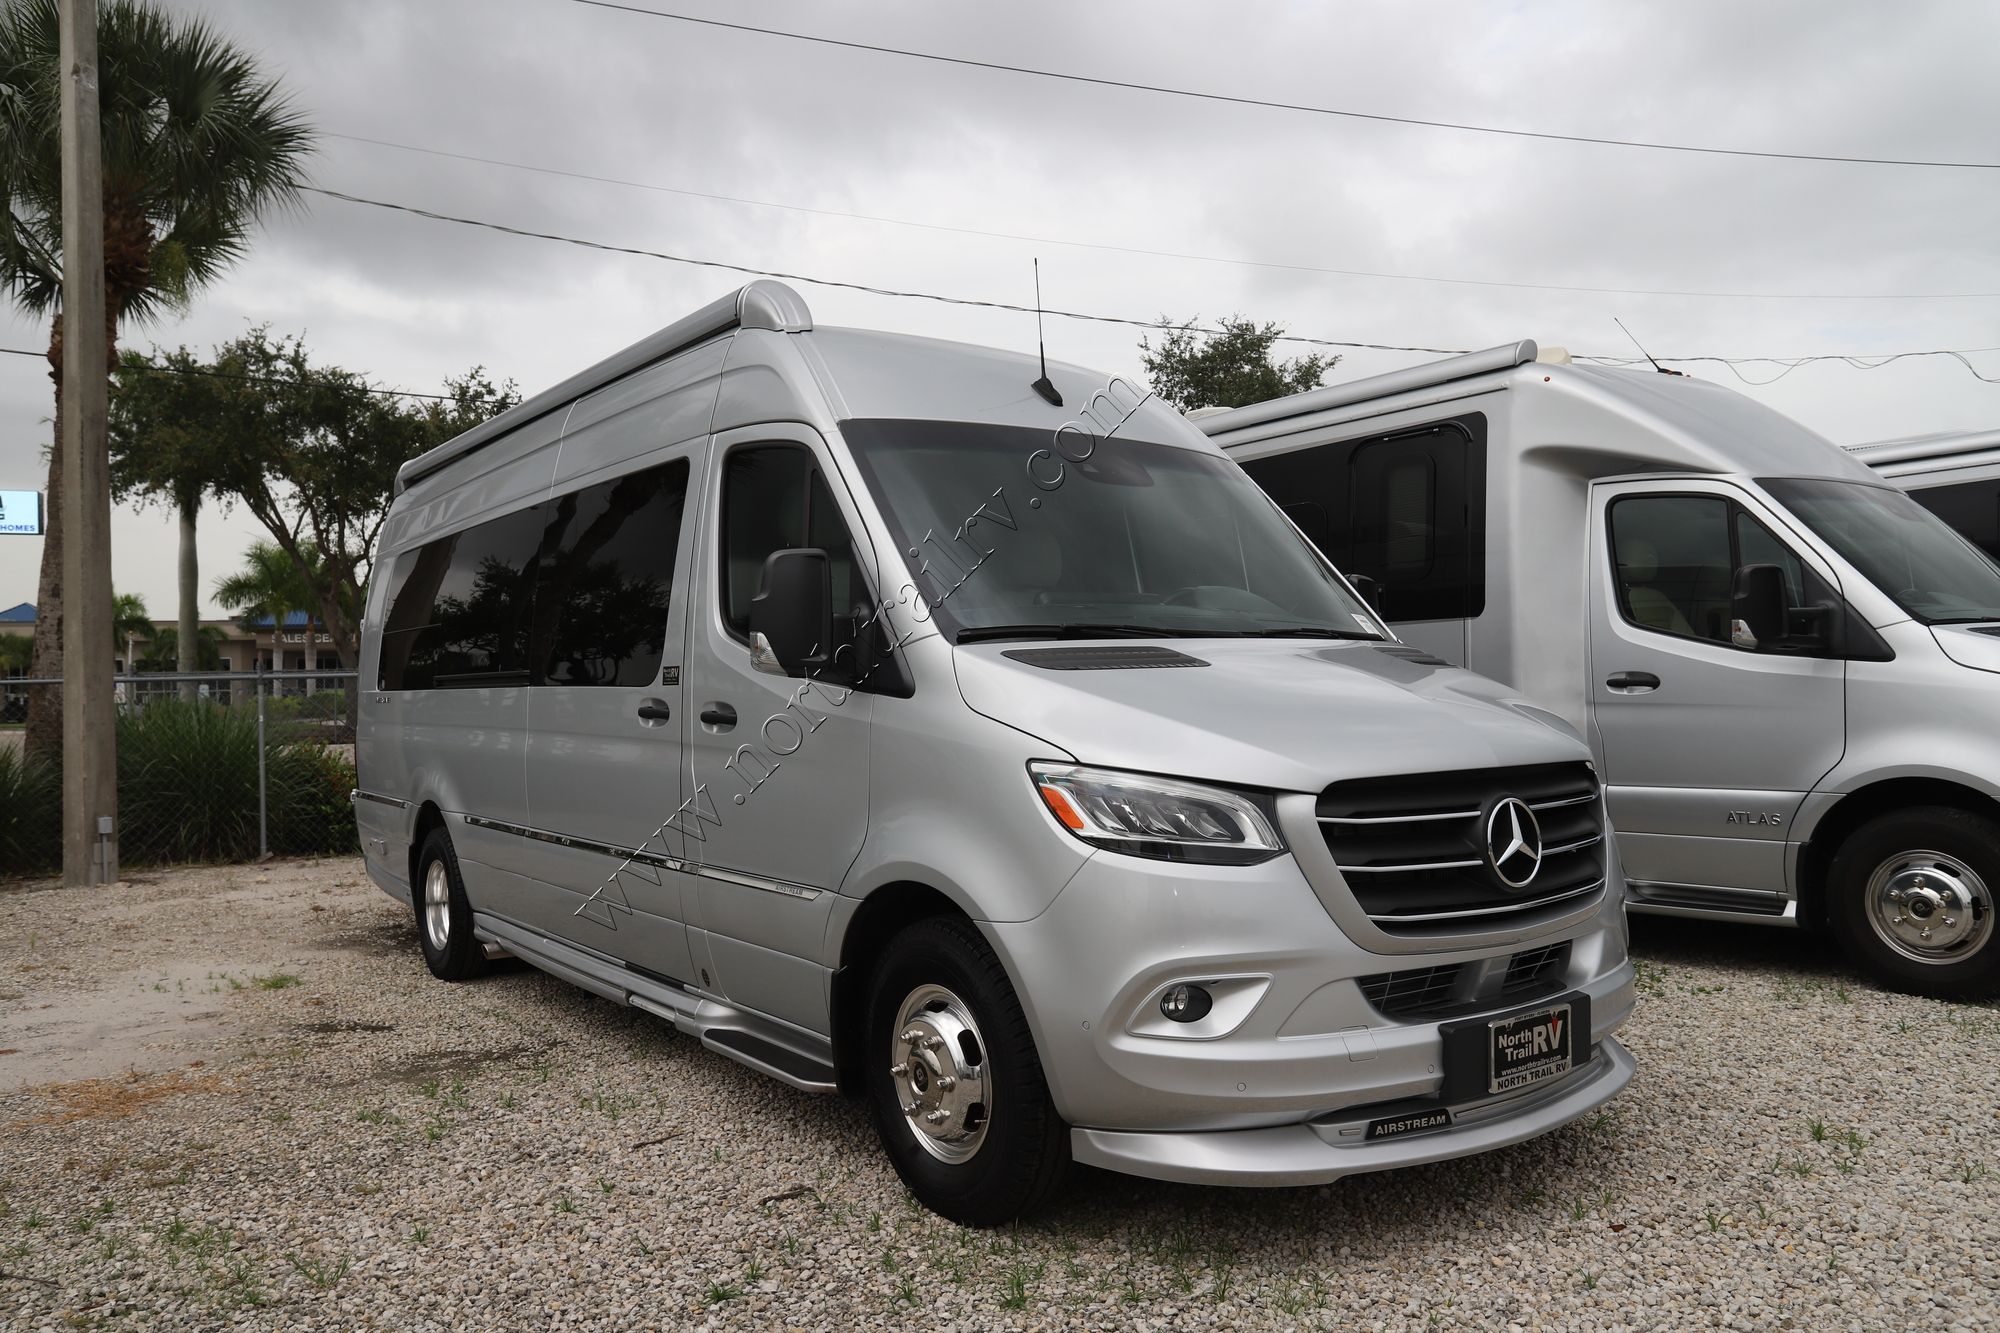 Used 2023 Airstream Interstate 24GT  Class B  For Sale